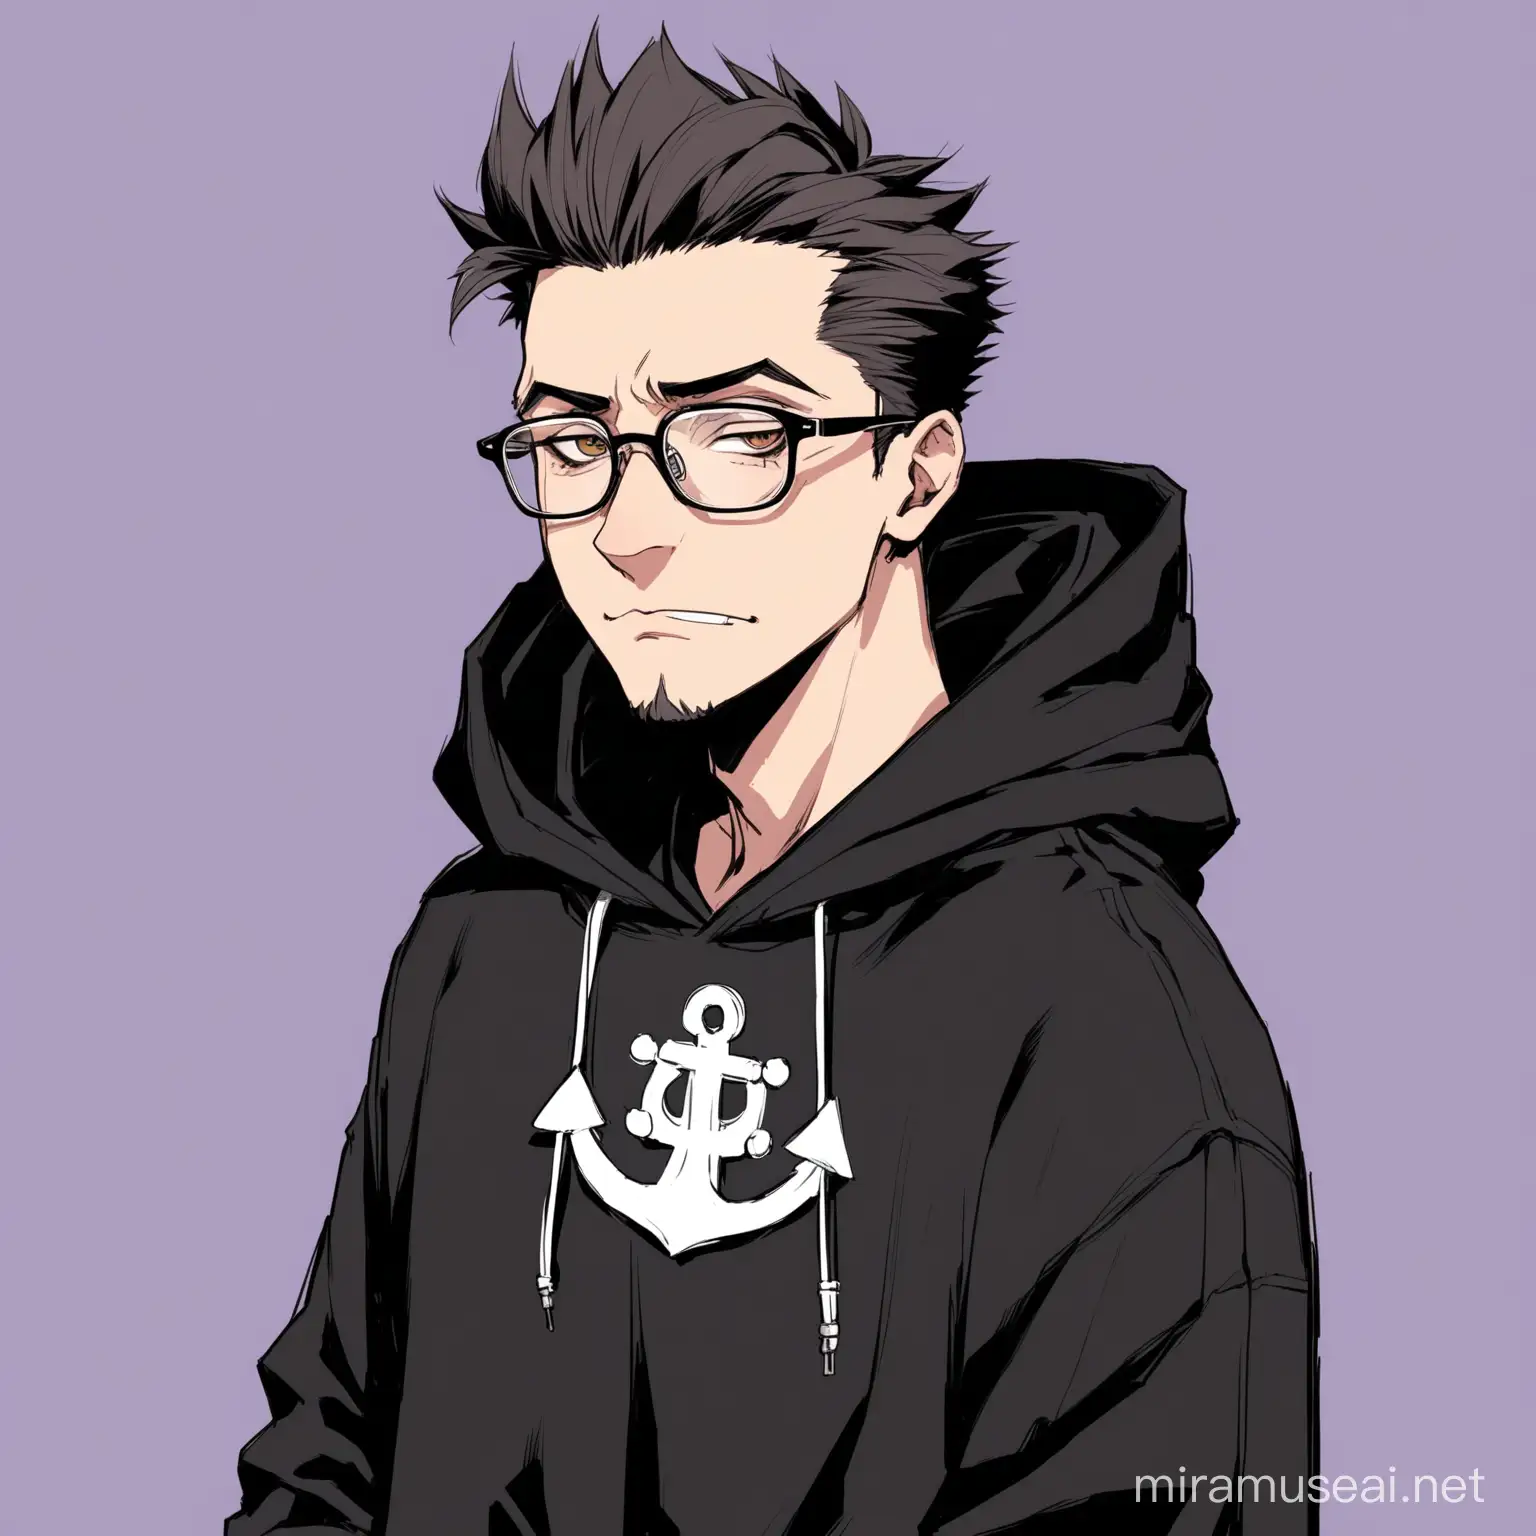 cool,hacker,black hoodie,glasses,quiff hairs,aesthetic,handome,aesthetic,psycho,oblong face,m shape harirline,big nose,small mouth,anchor beared